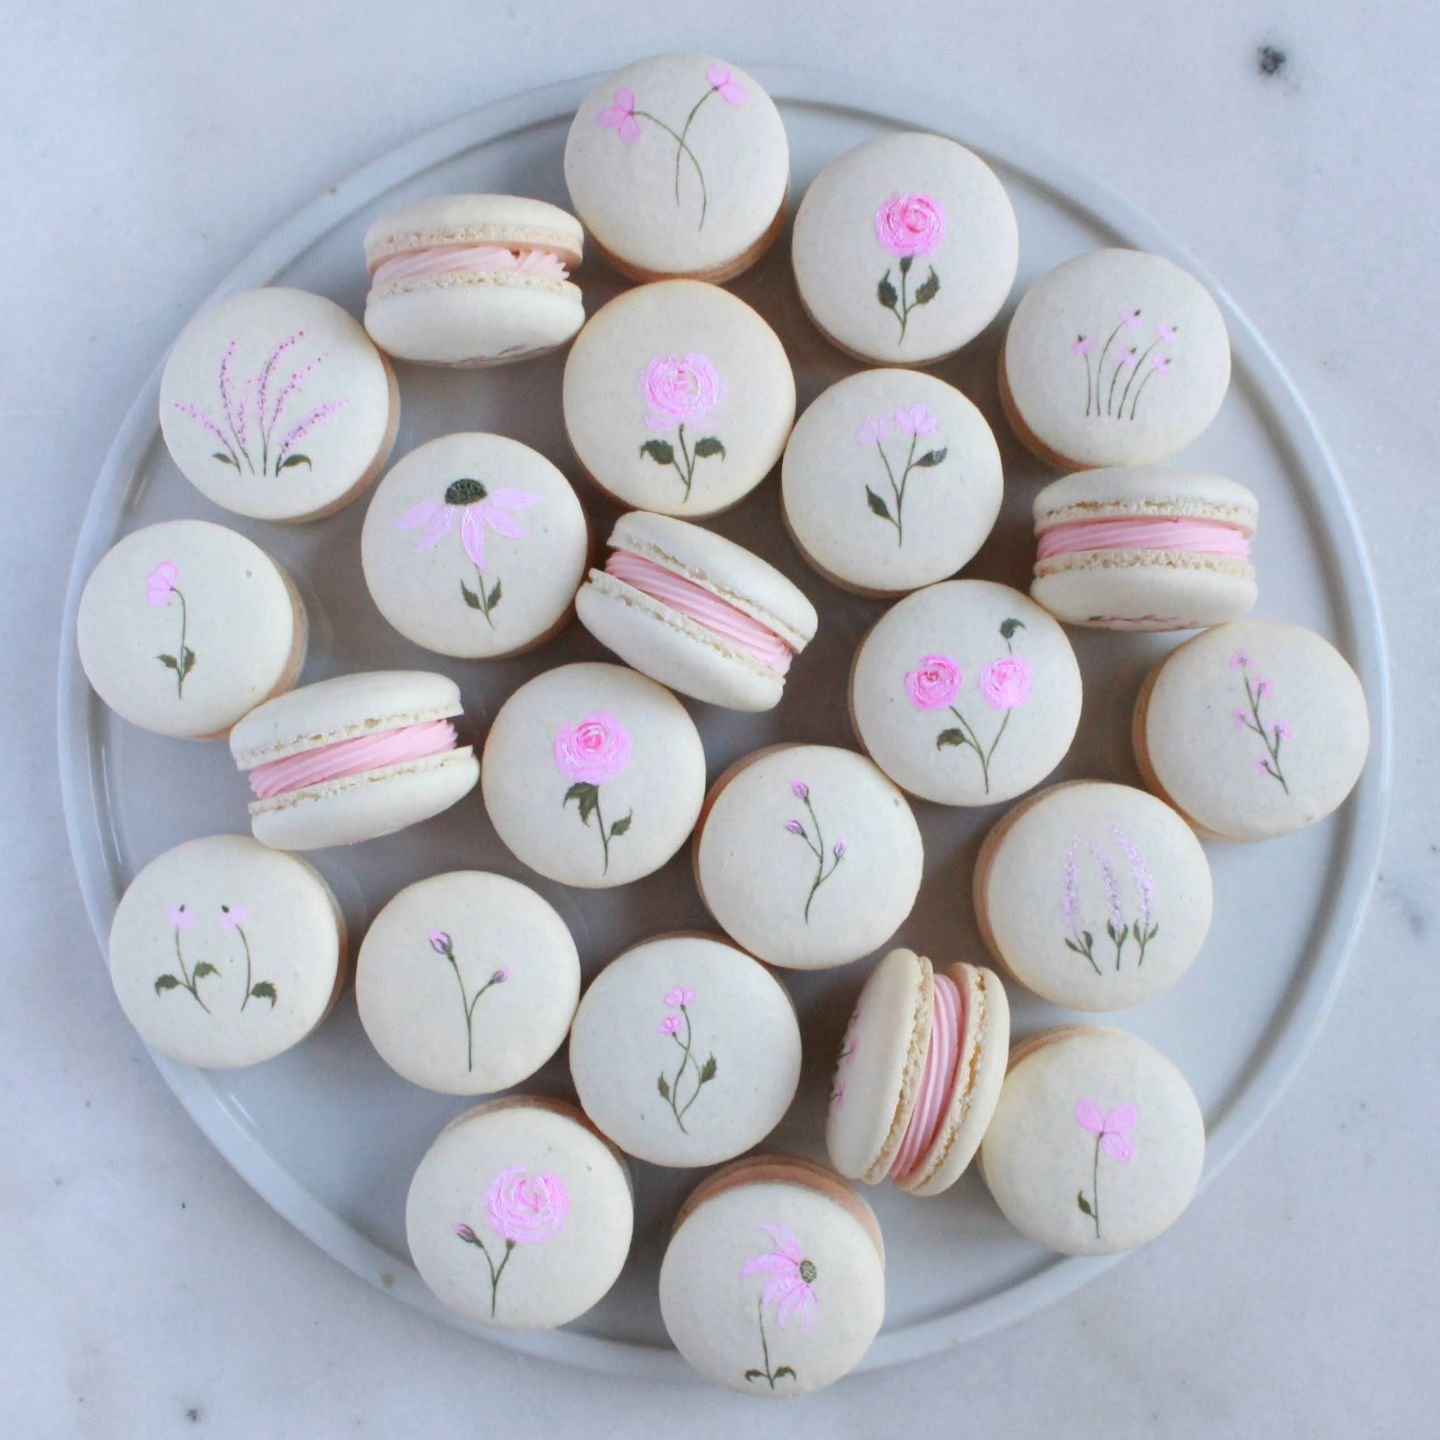 Pink flower macarons for the sweetest Sip &amp; See 💕🌸🌷

Filling flavors: vanilla buttercream and cookies &amp; cream

#karinasconfectioneries #orlandocookies #orlandomacarons #orlandofoodies #orlandocakedecorator #orlandosmallbusinesses